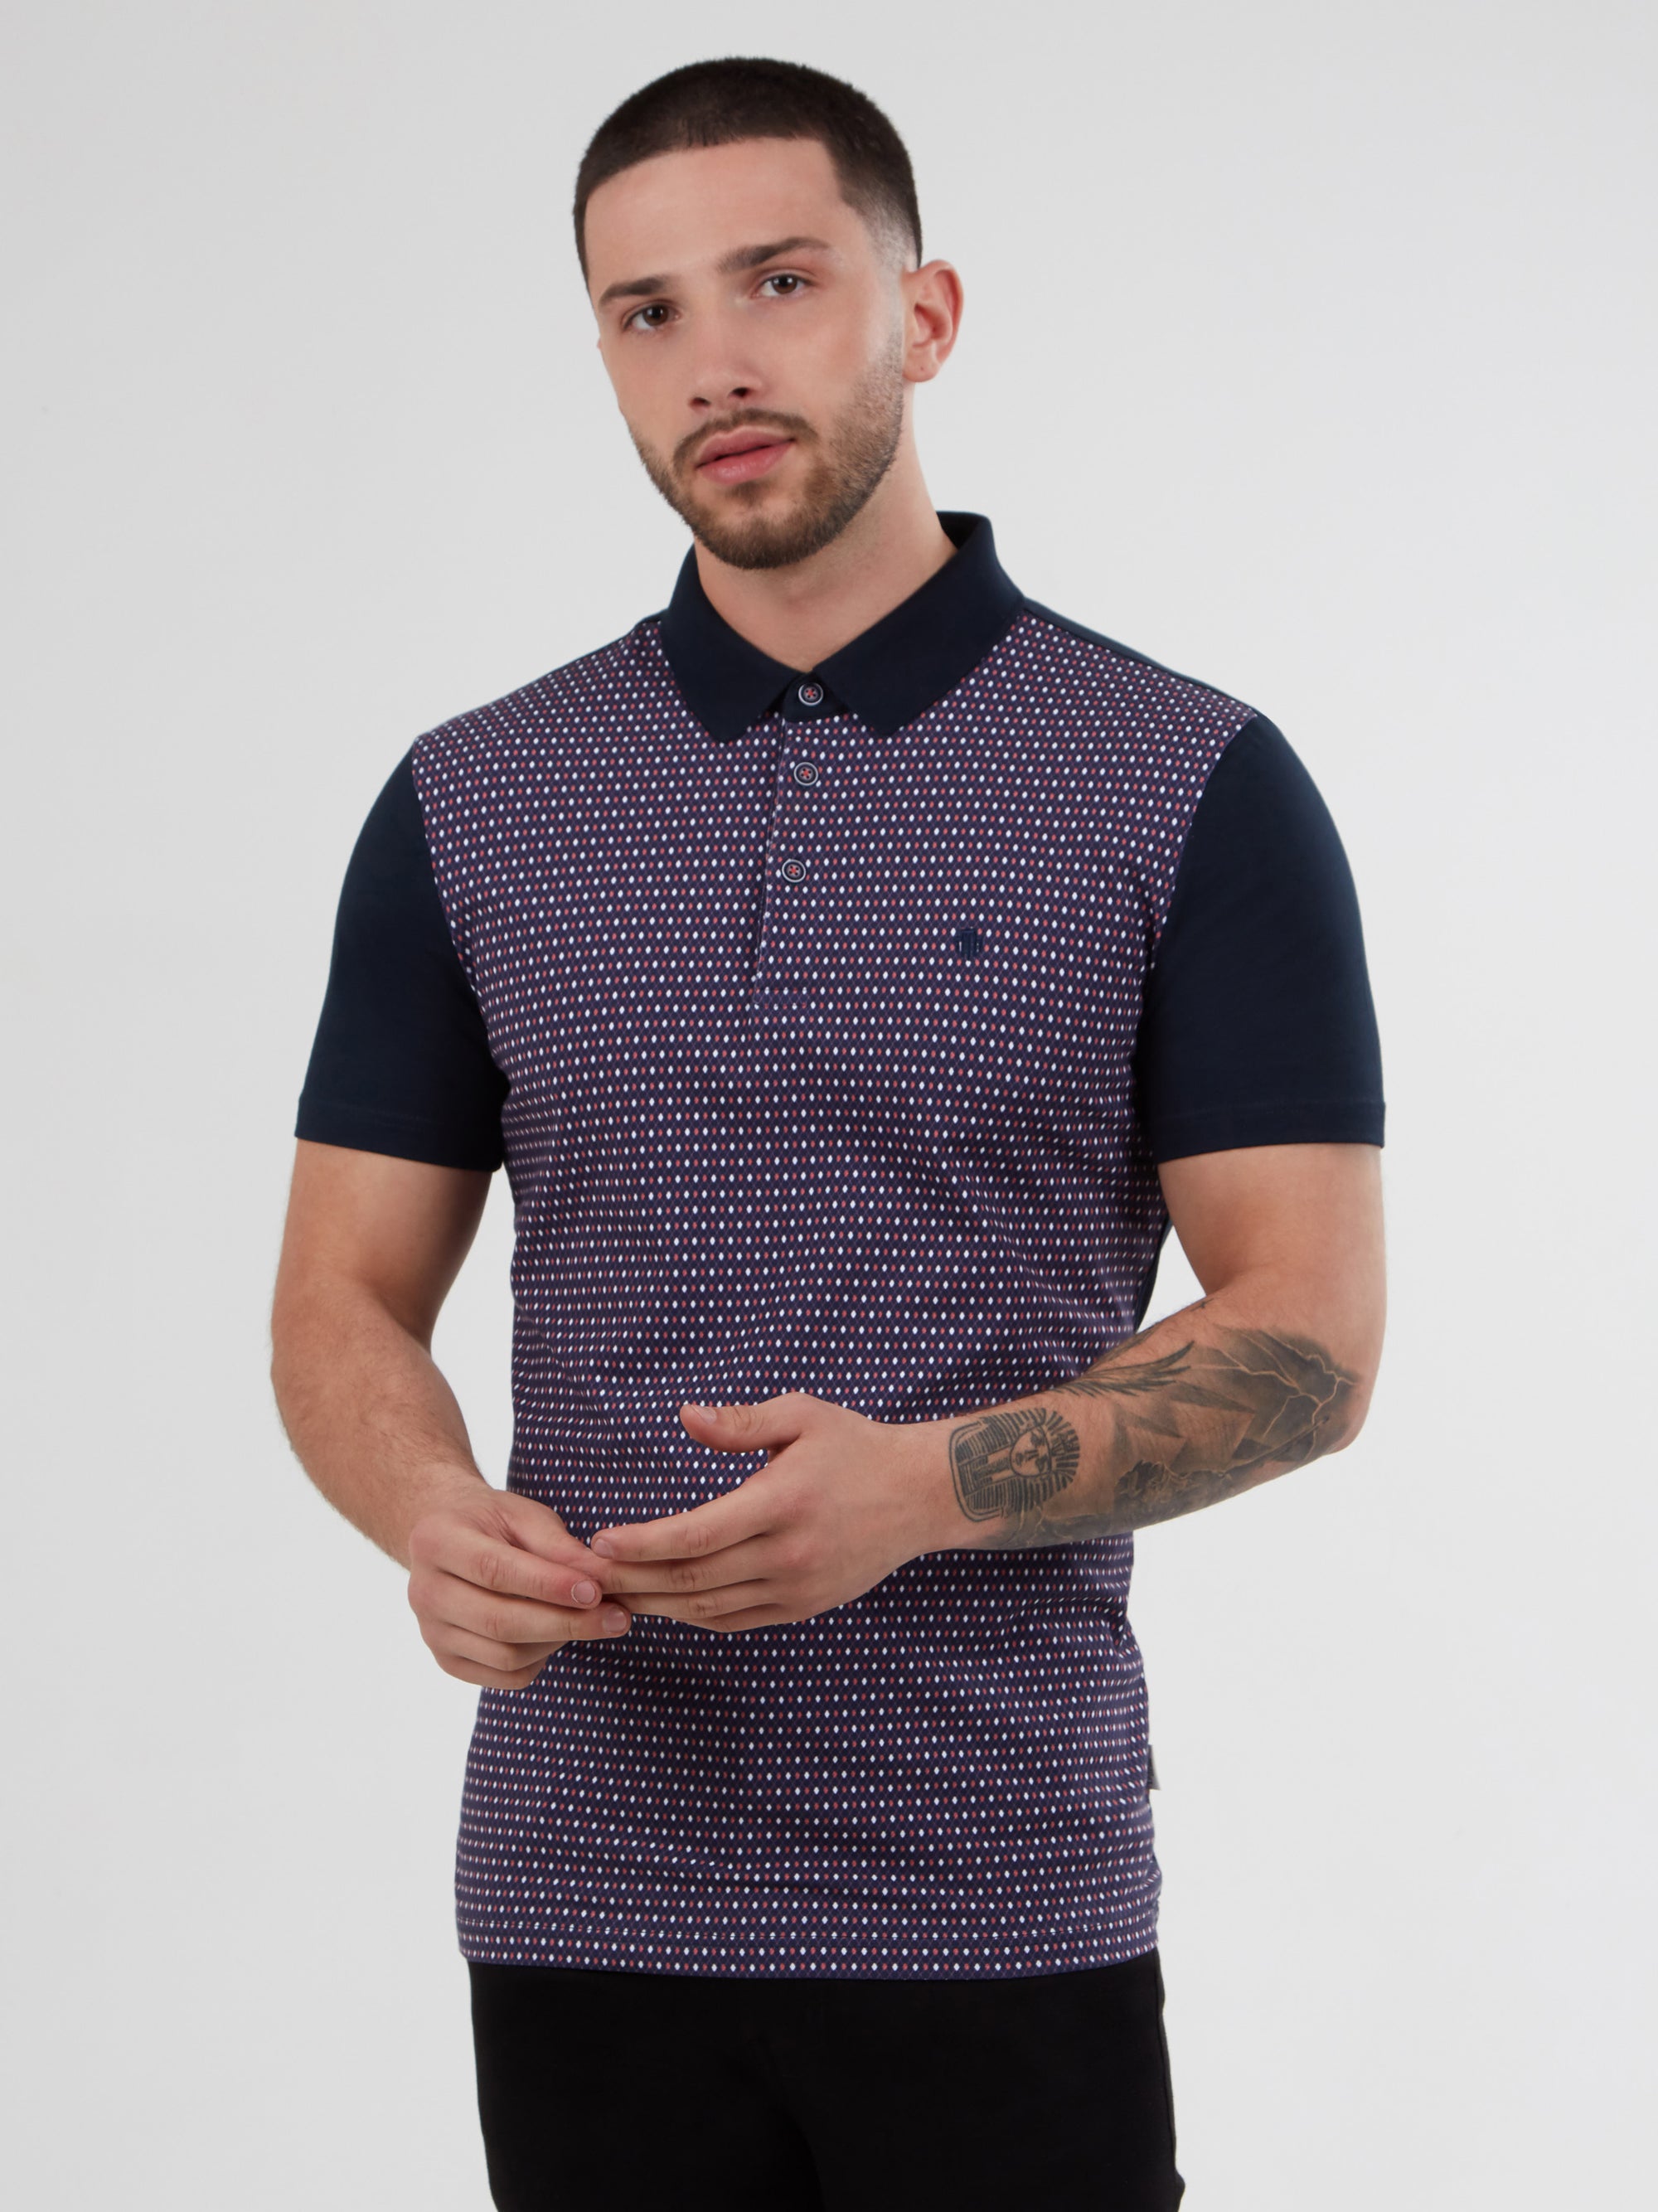 Regular Fit Noro Navy Printed Jersey Polo